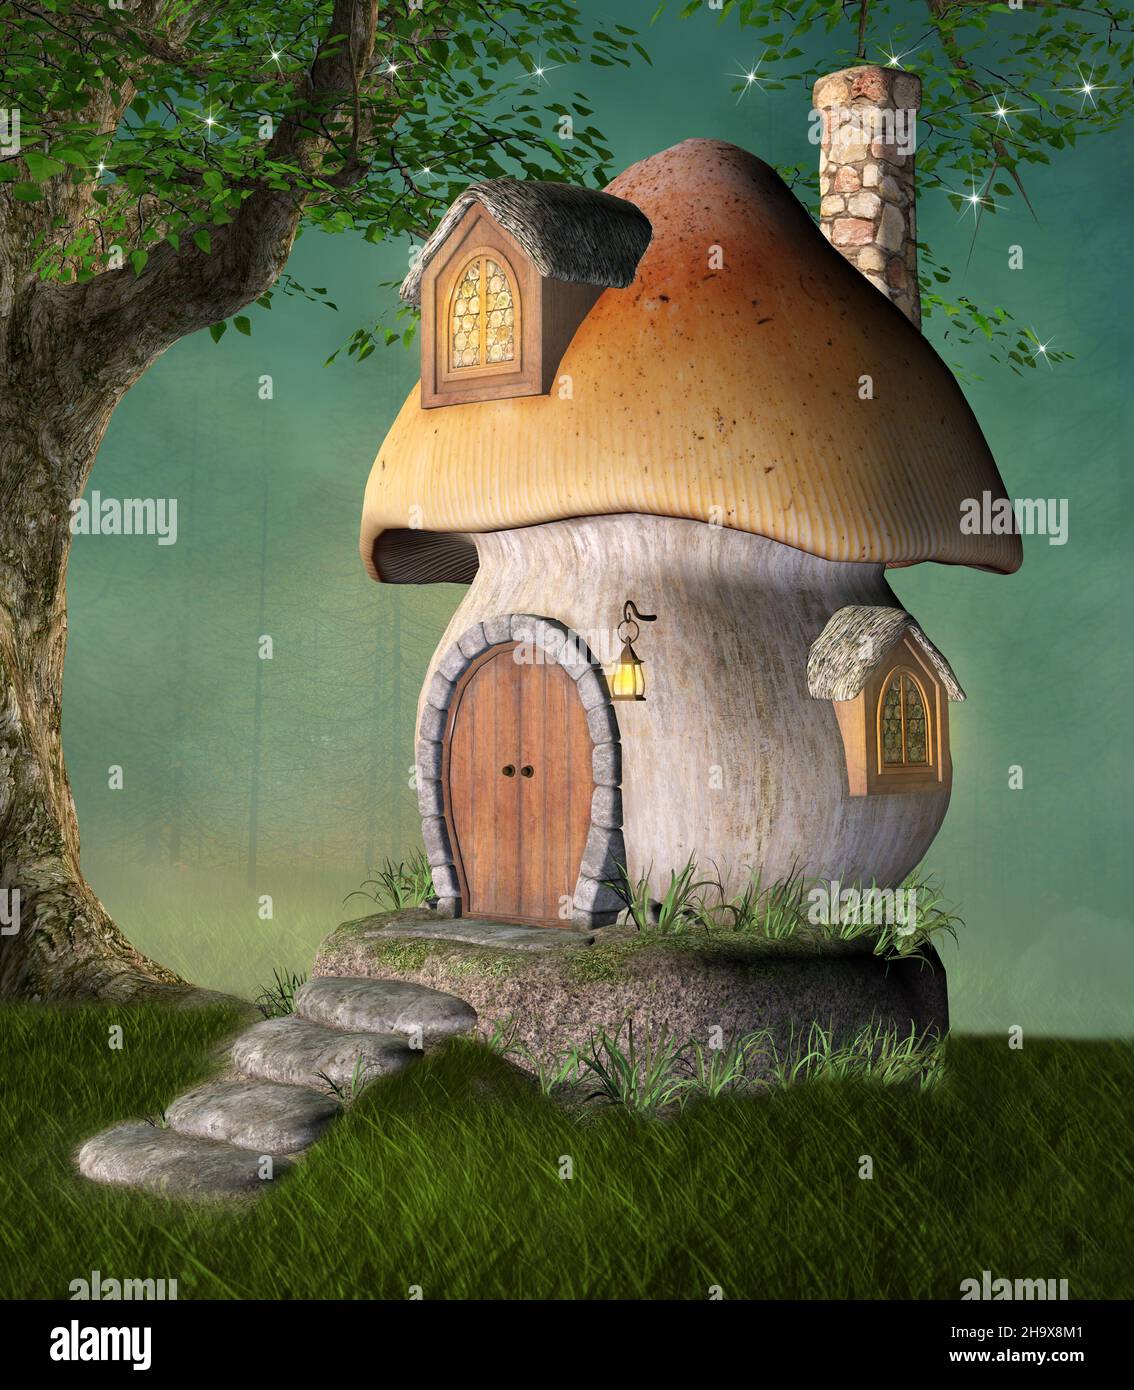 Fantasy mushroom house by a tree in a green meadow Stock Photo